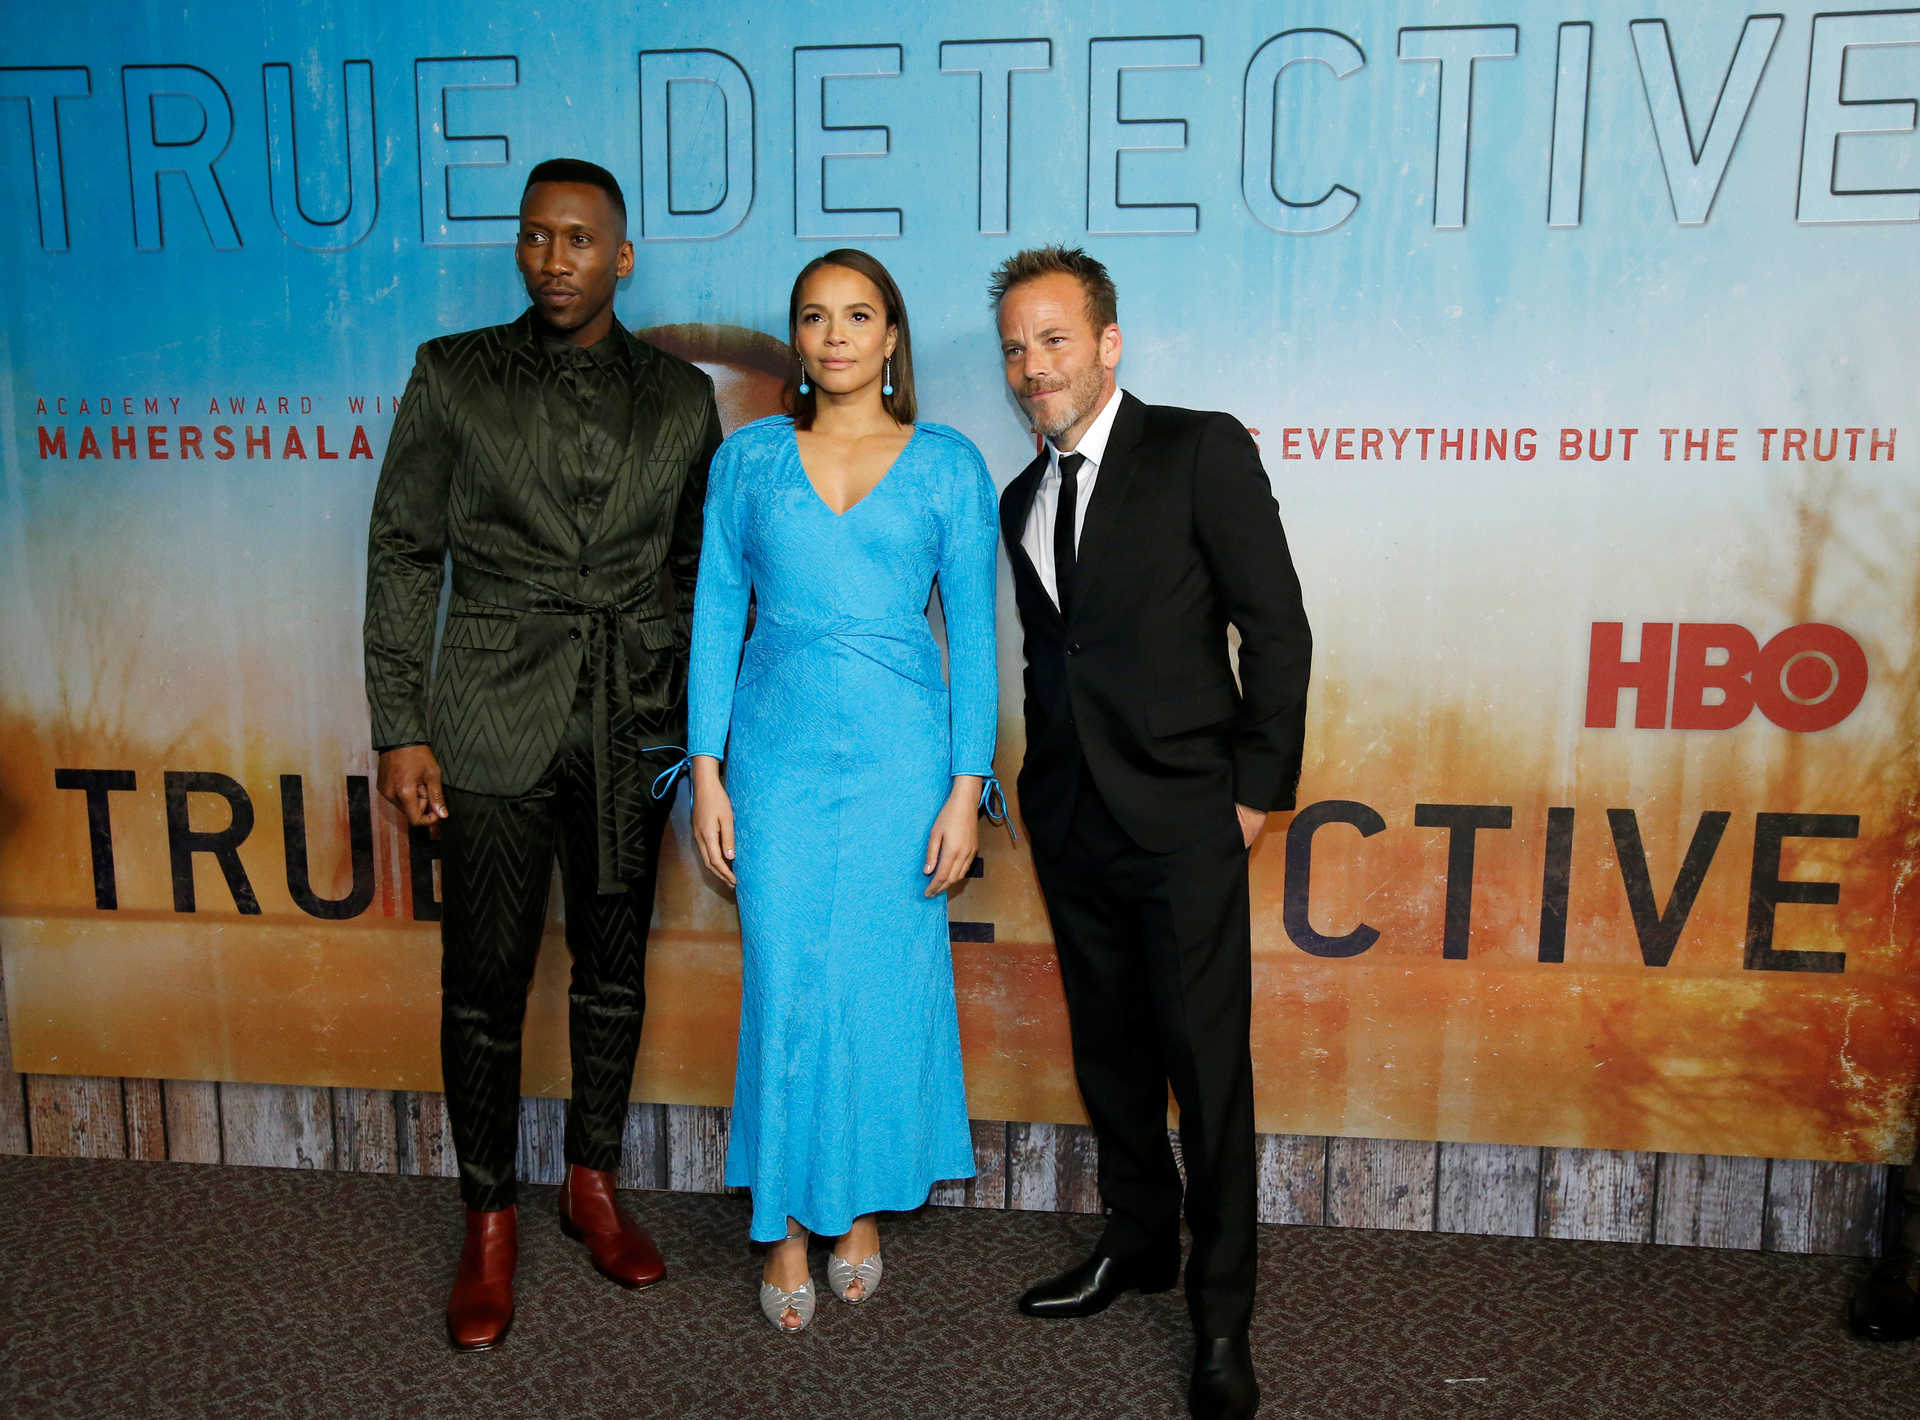 Cast members Ali, Ejogo and Dorff pose at the premiere for season 3 of the television series “True Detective” in Los Angeles